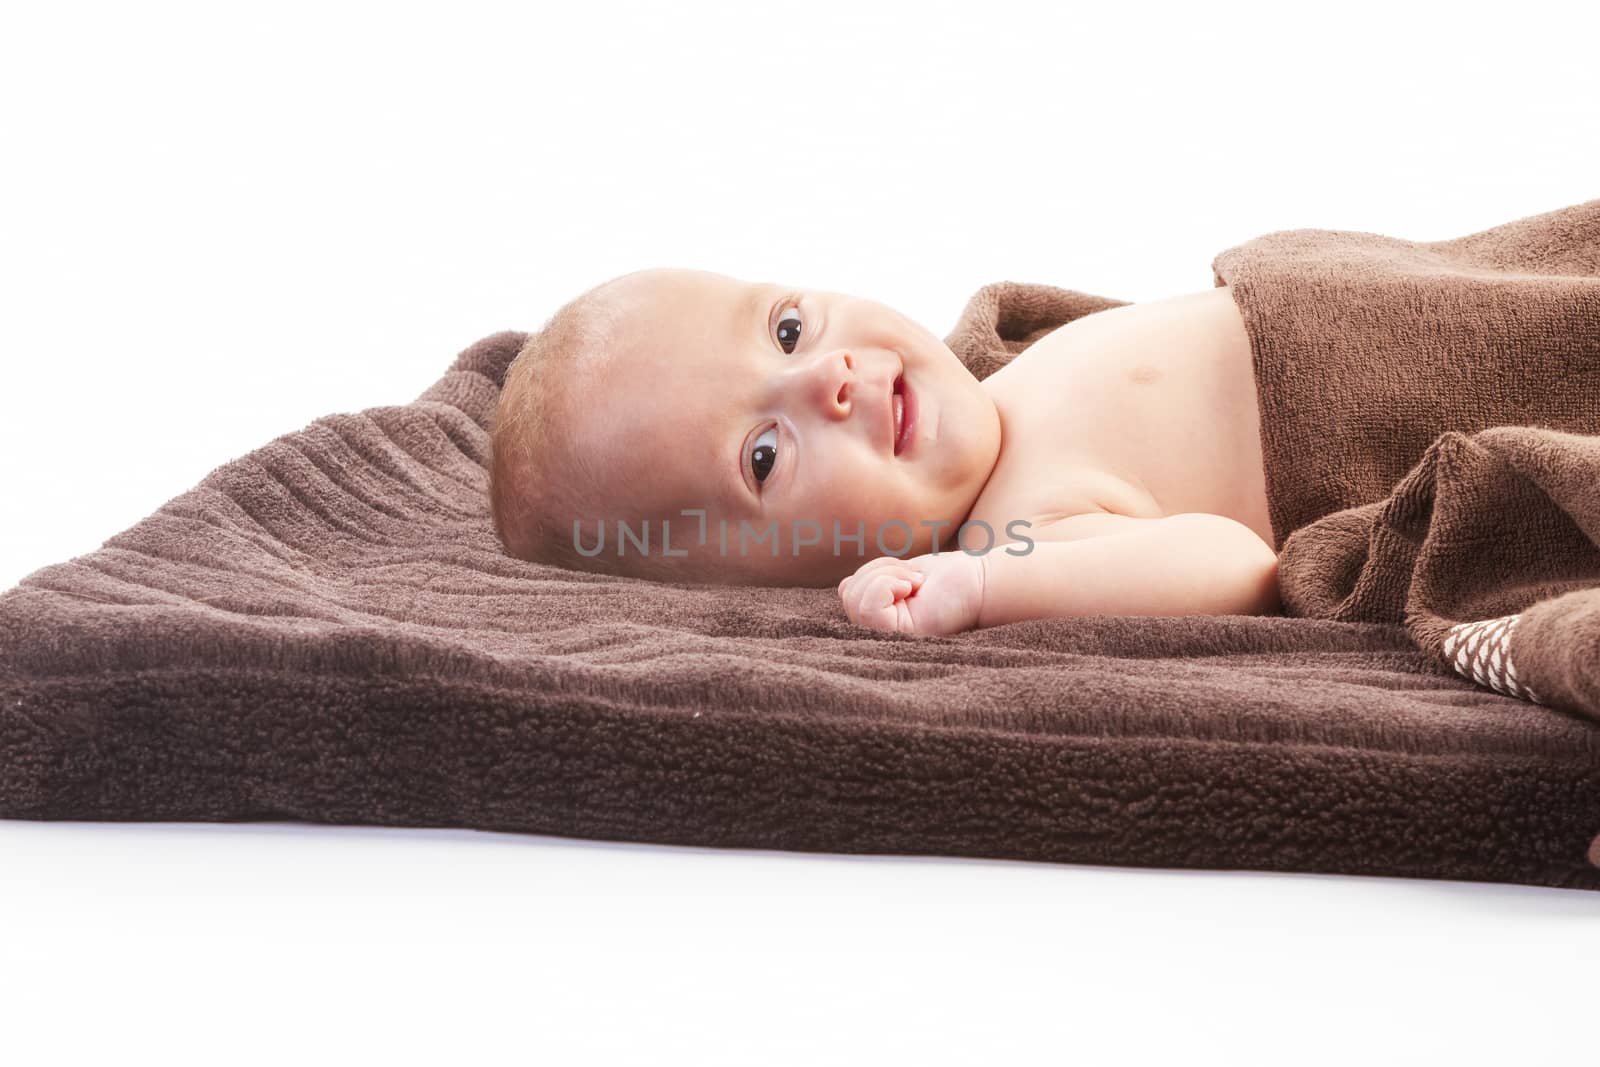 baby boy over brown blanket by manaemedia